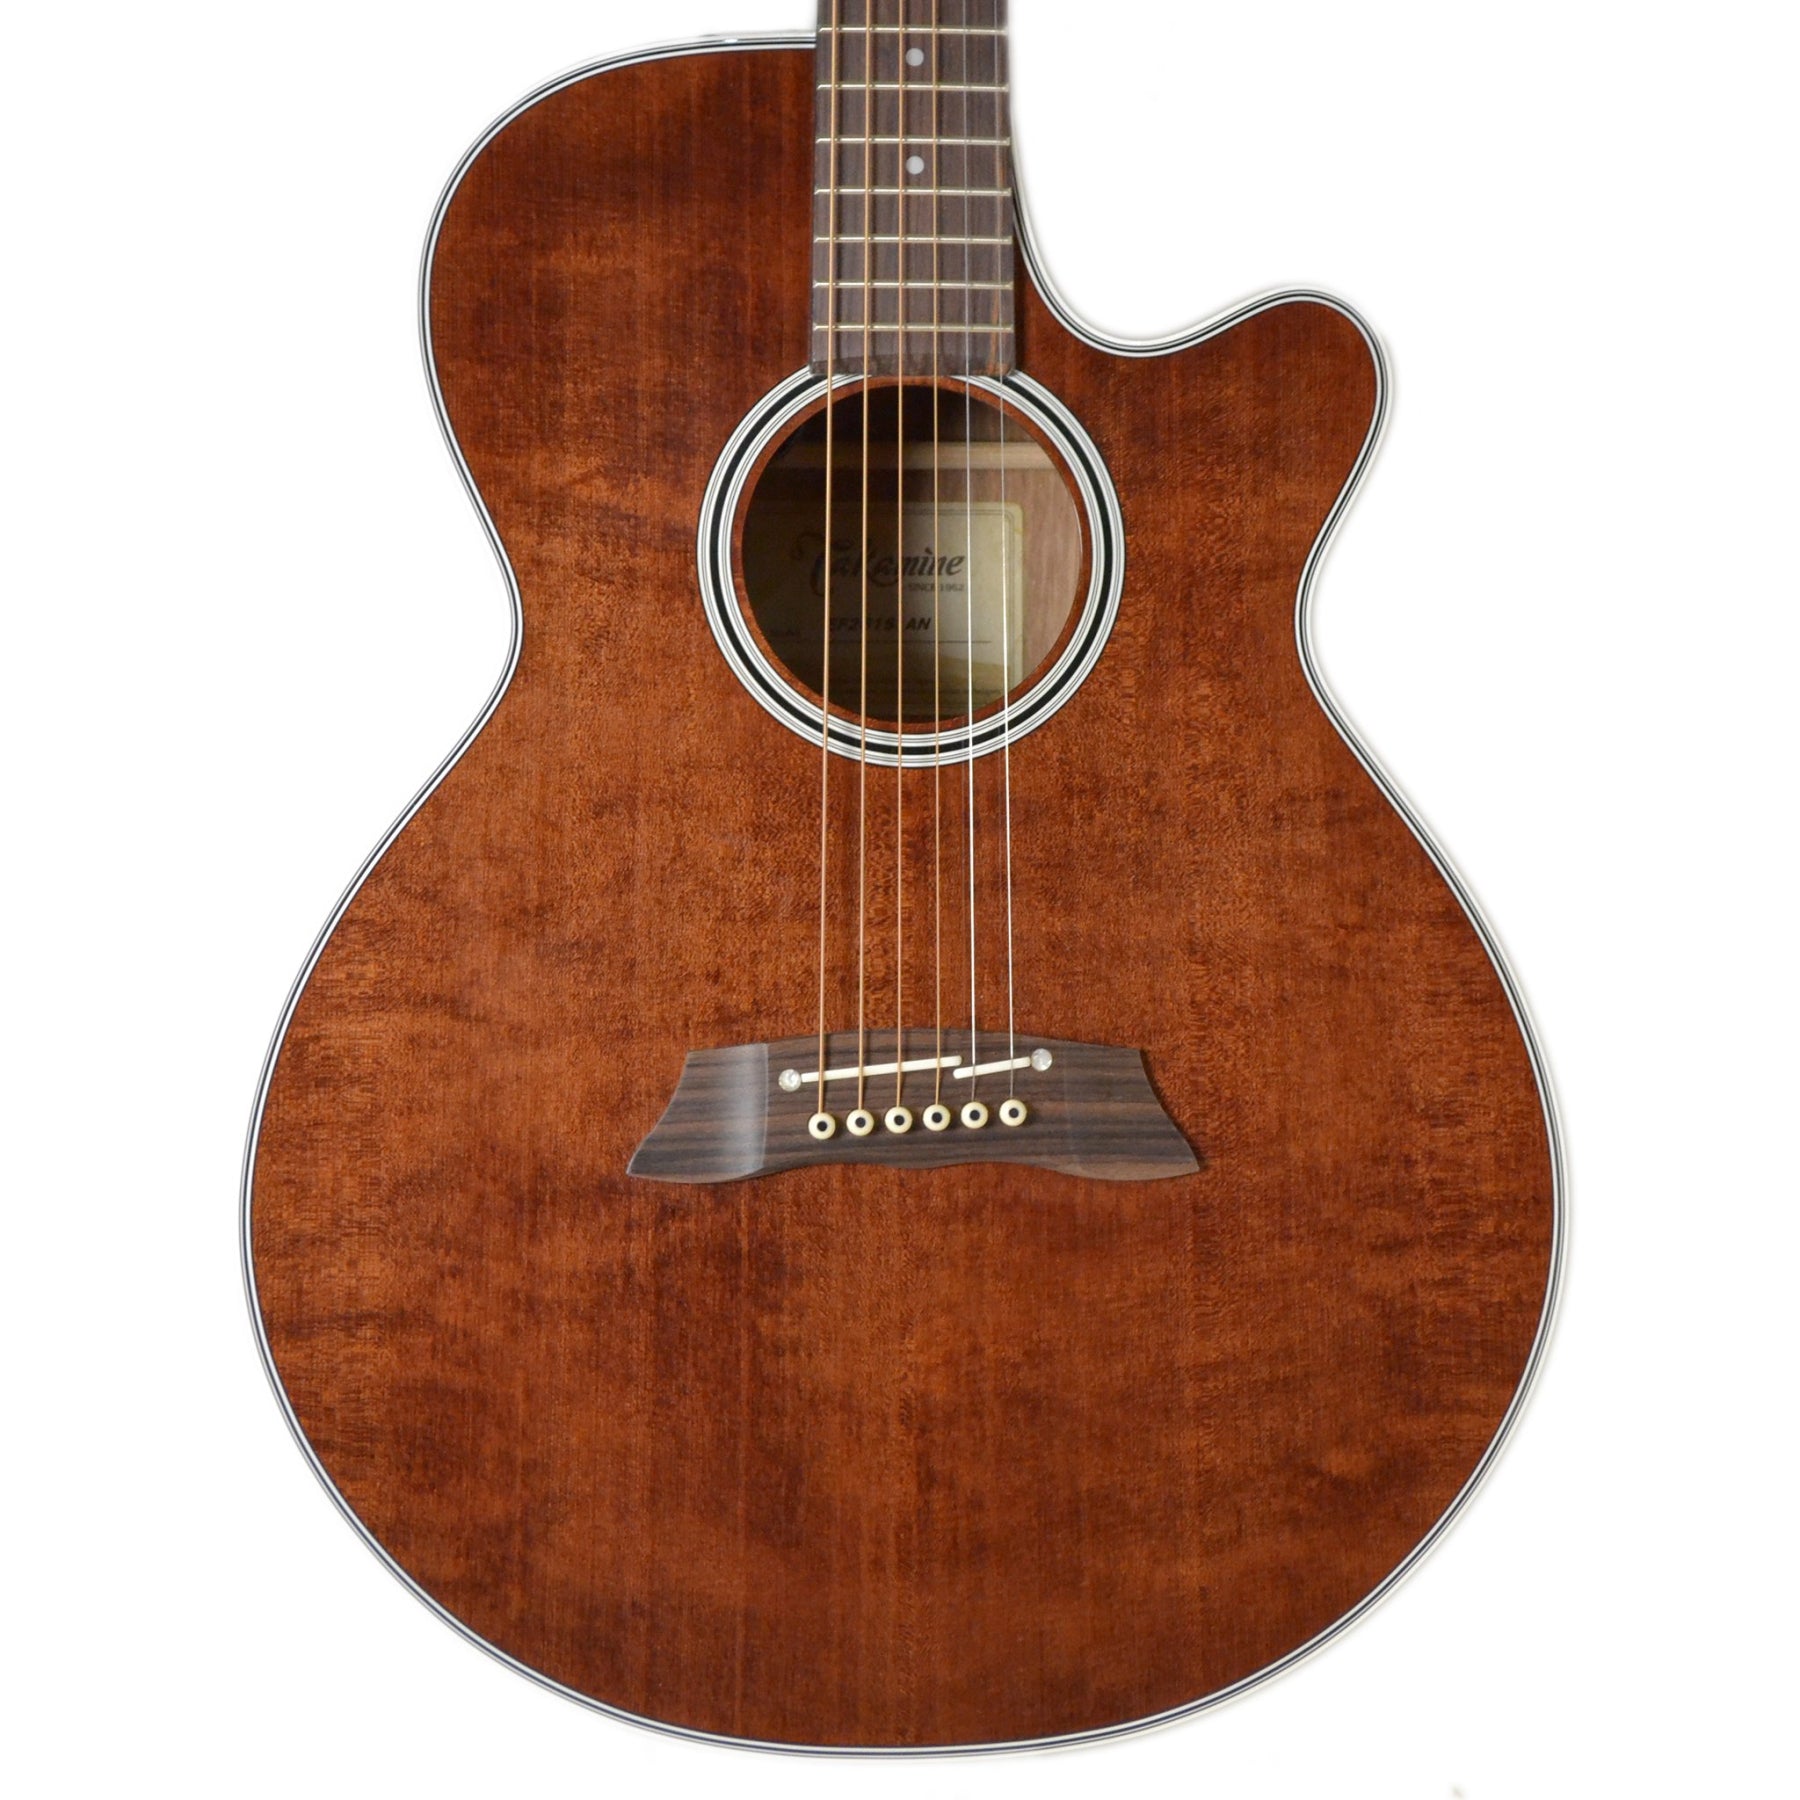 TAKAMINE PRO SERIES EF261S AN FXC BODY CUTAWAY SOLID CEDAR TOP ACOUSTIC-ELECTRIC WITH CT-4BII PREAMP & HARD CASE